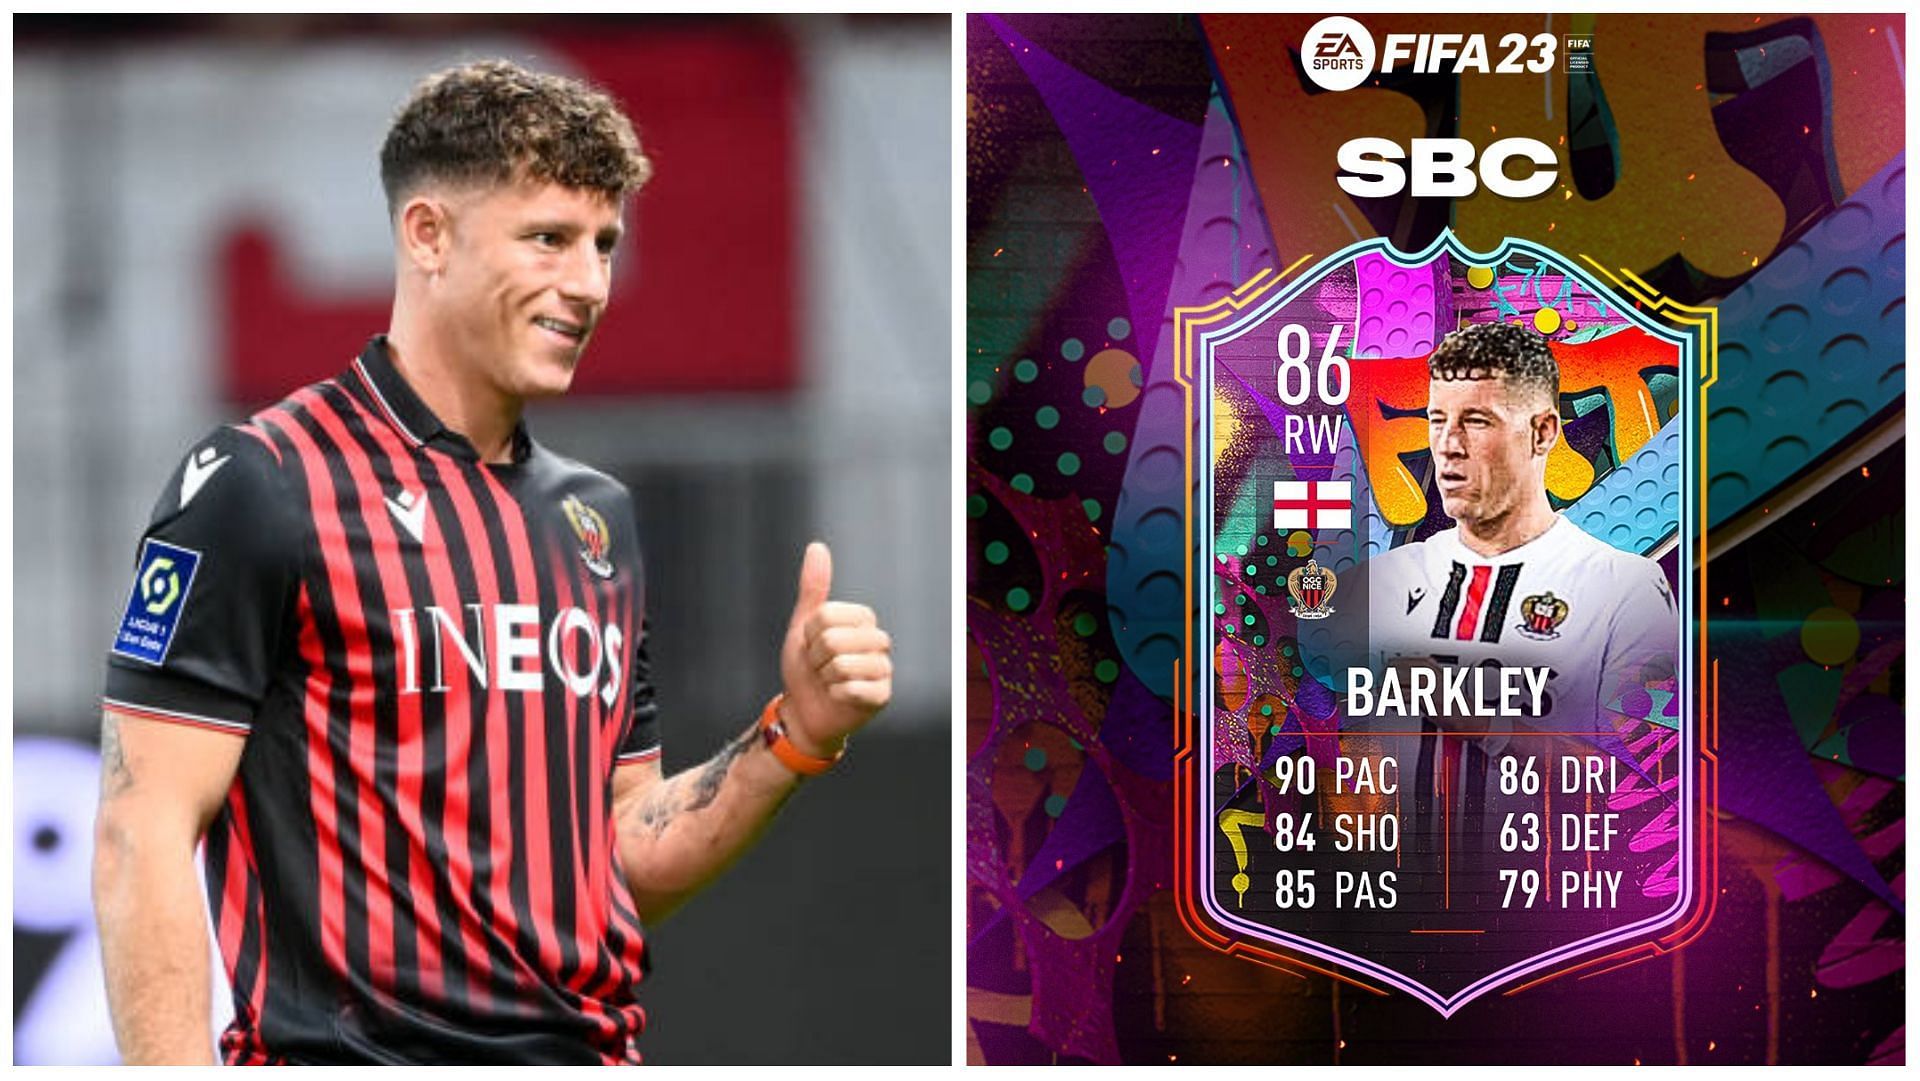 Ross Barkley will receive an Out of Position SBC in FIFA 23 (Images via Getty Images and Twitter/FUT Sheriff)